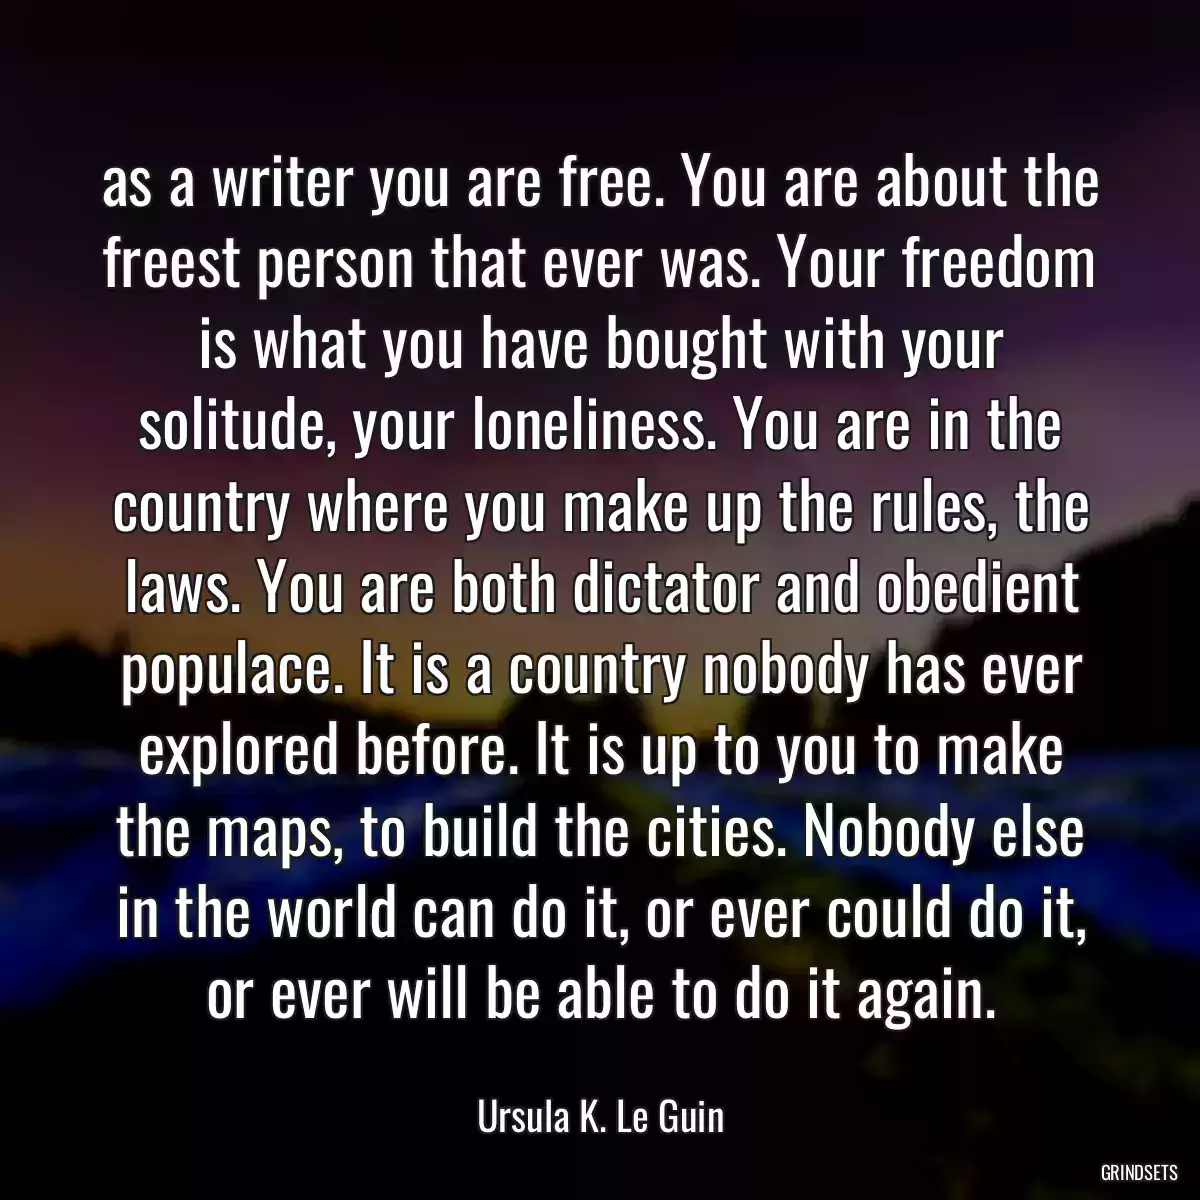 as a writer you are free. You are about the freest person that ever was. Your freedom is what you have bought with your solitude, your loneliness. You are in the country where you make up the rules, the laws. You are both dictator and obedient populace. It is a country nobody has ever explored before. It is up to you to make the maps, to build the cities. Nobody else in the world can do it, or ever could do it, or ever will be able to do it again.